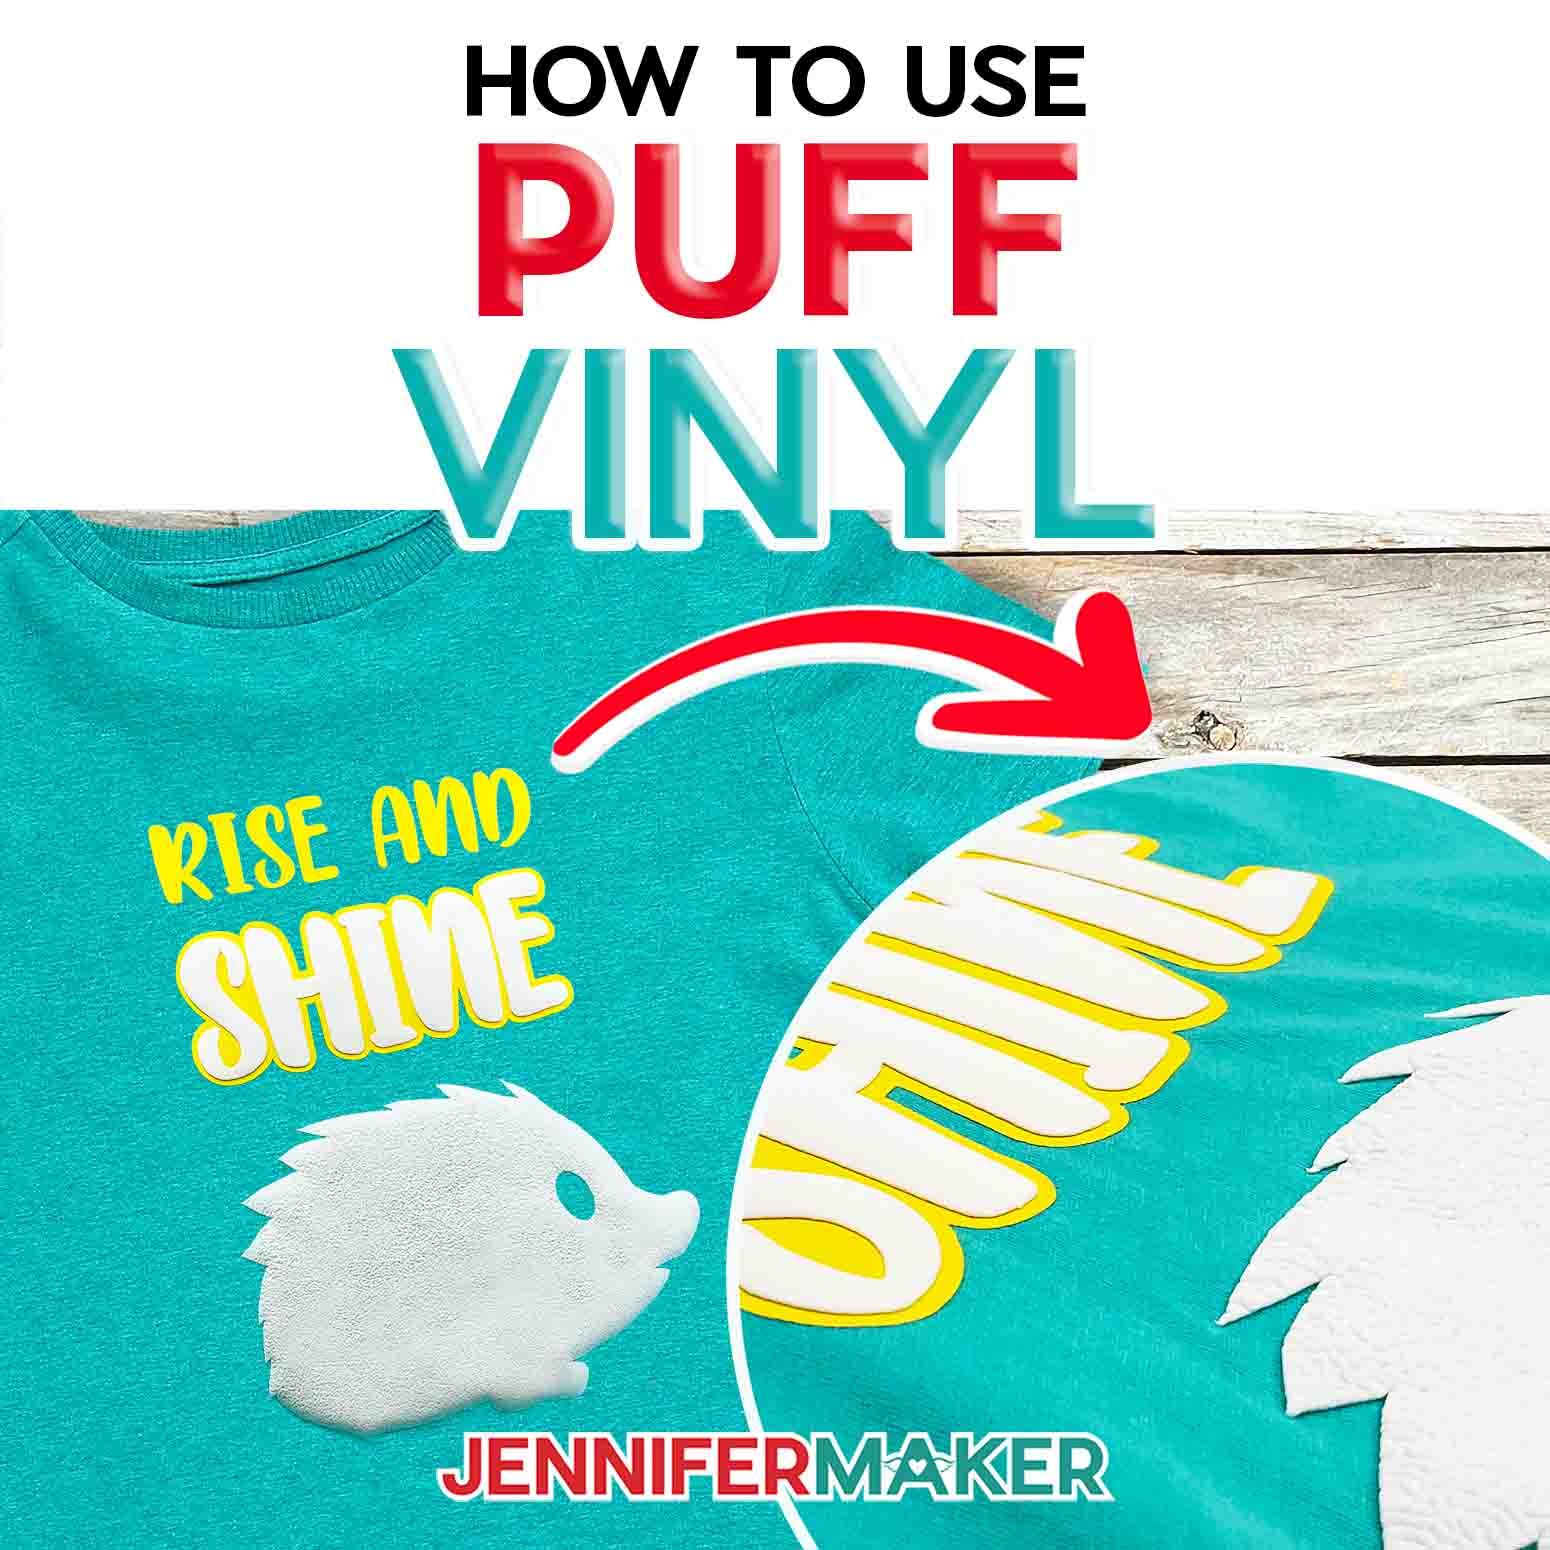 How to use Puff Vinyl! Turquoise blue T-shirt with a puffy white vinyl porcupine and "Rise and Shine" in yellow HTV. Learn how to make 3D puff vinyl T-shirts with JenniferMaker's tutorial!